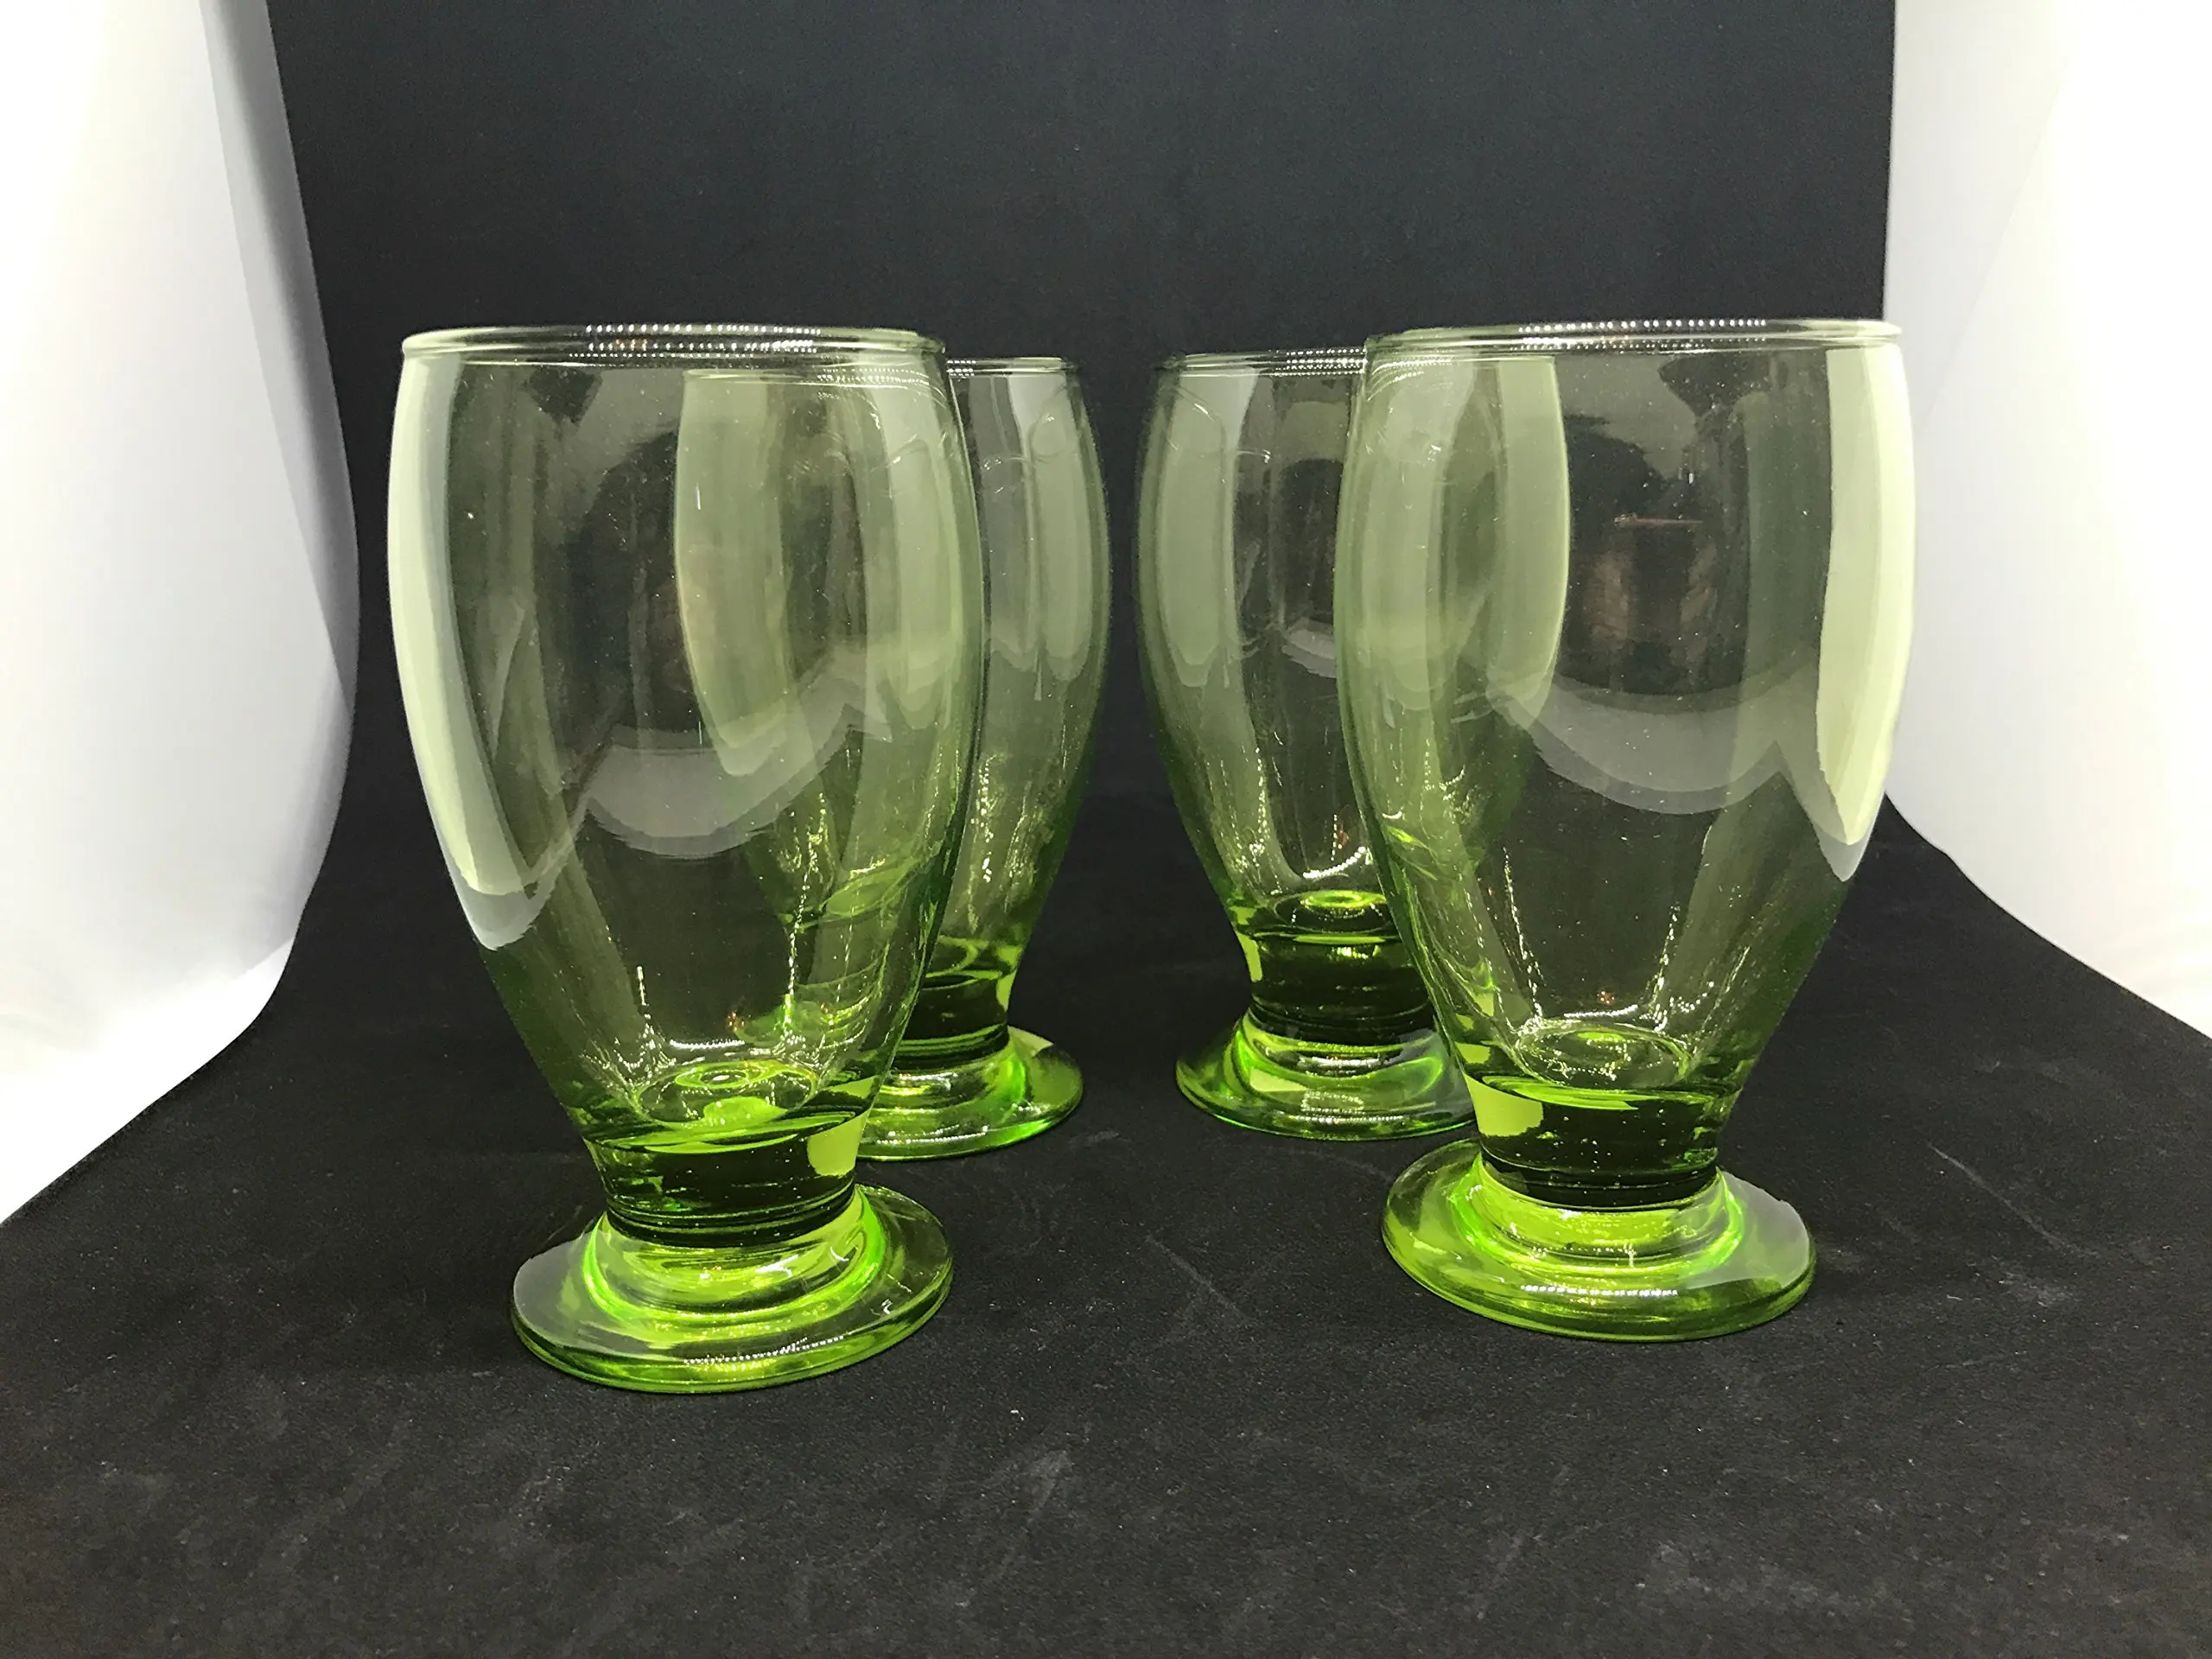 Download Cheap Green Wine Glasses Antique Find Green Wine Glasses Antique Deals On Line At Alibaba Com Yellowimages Mockups